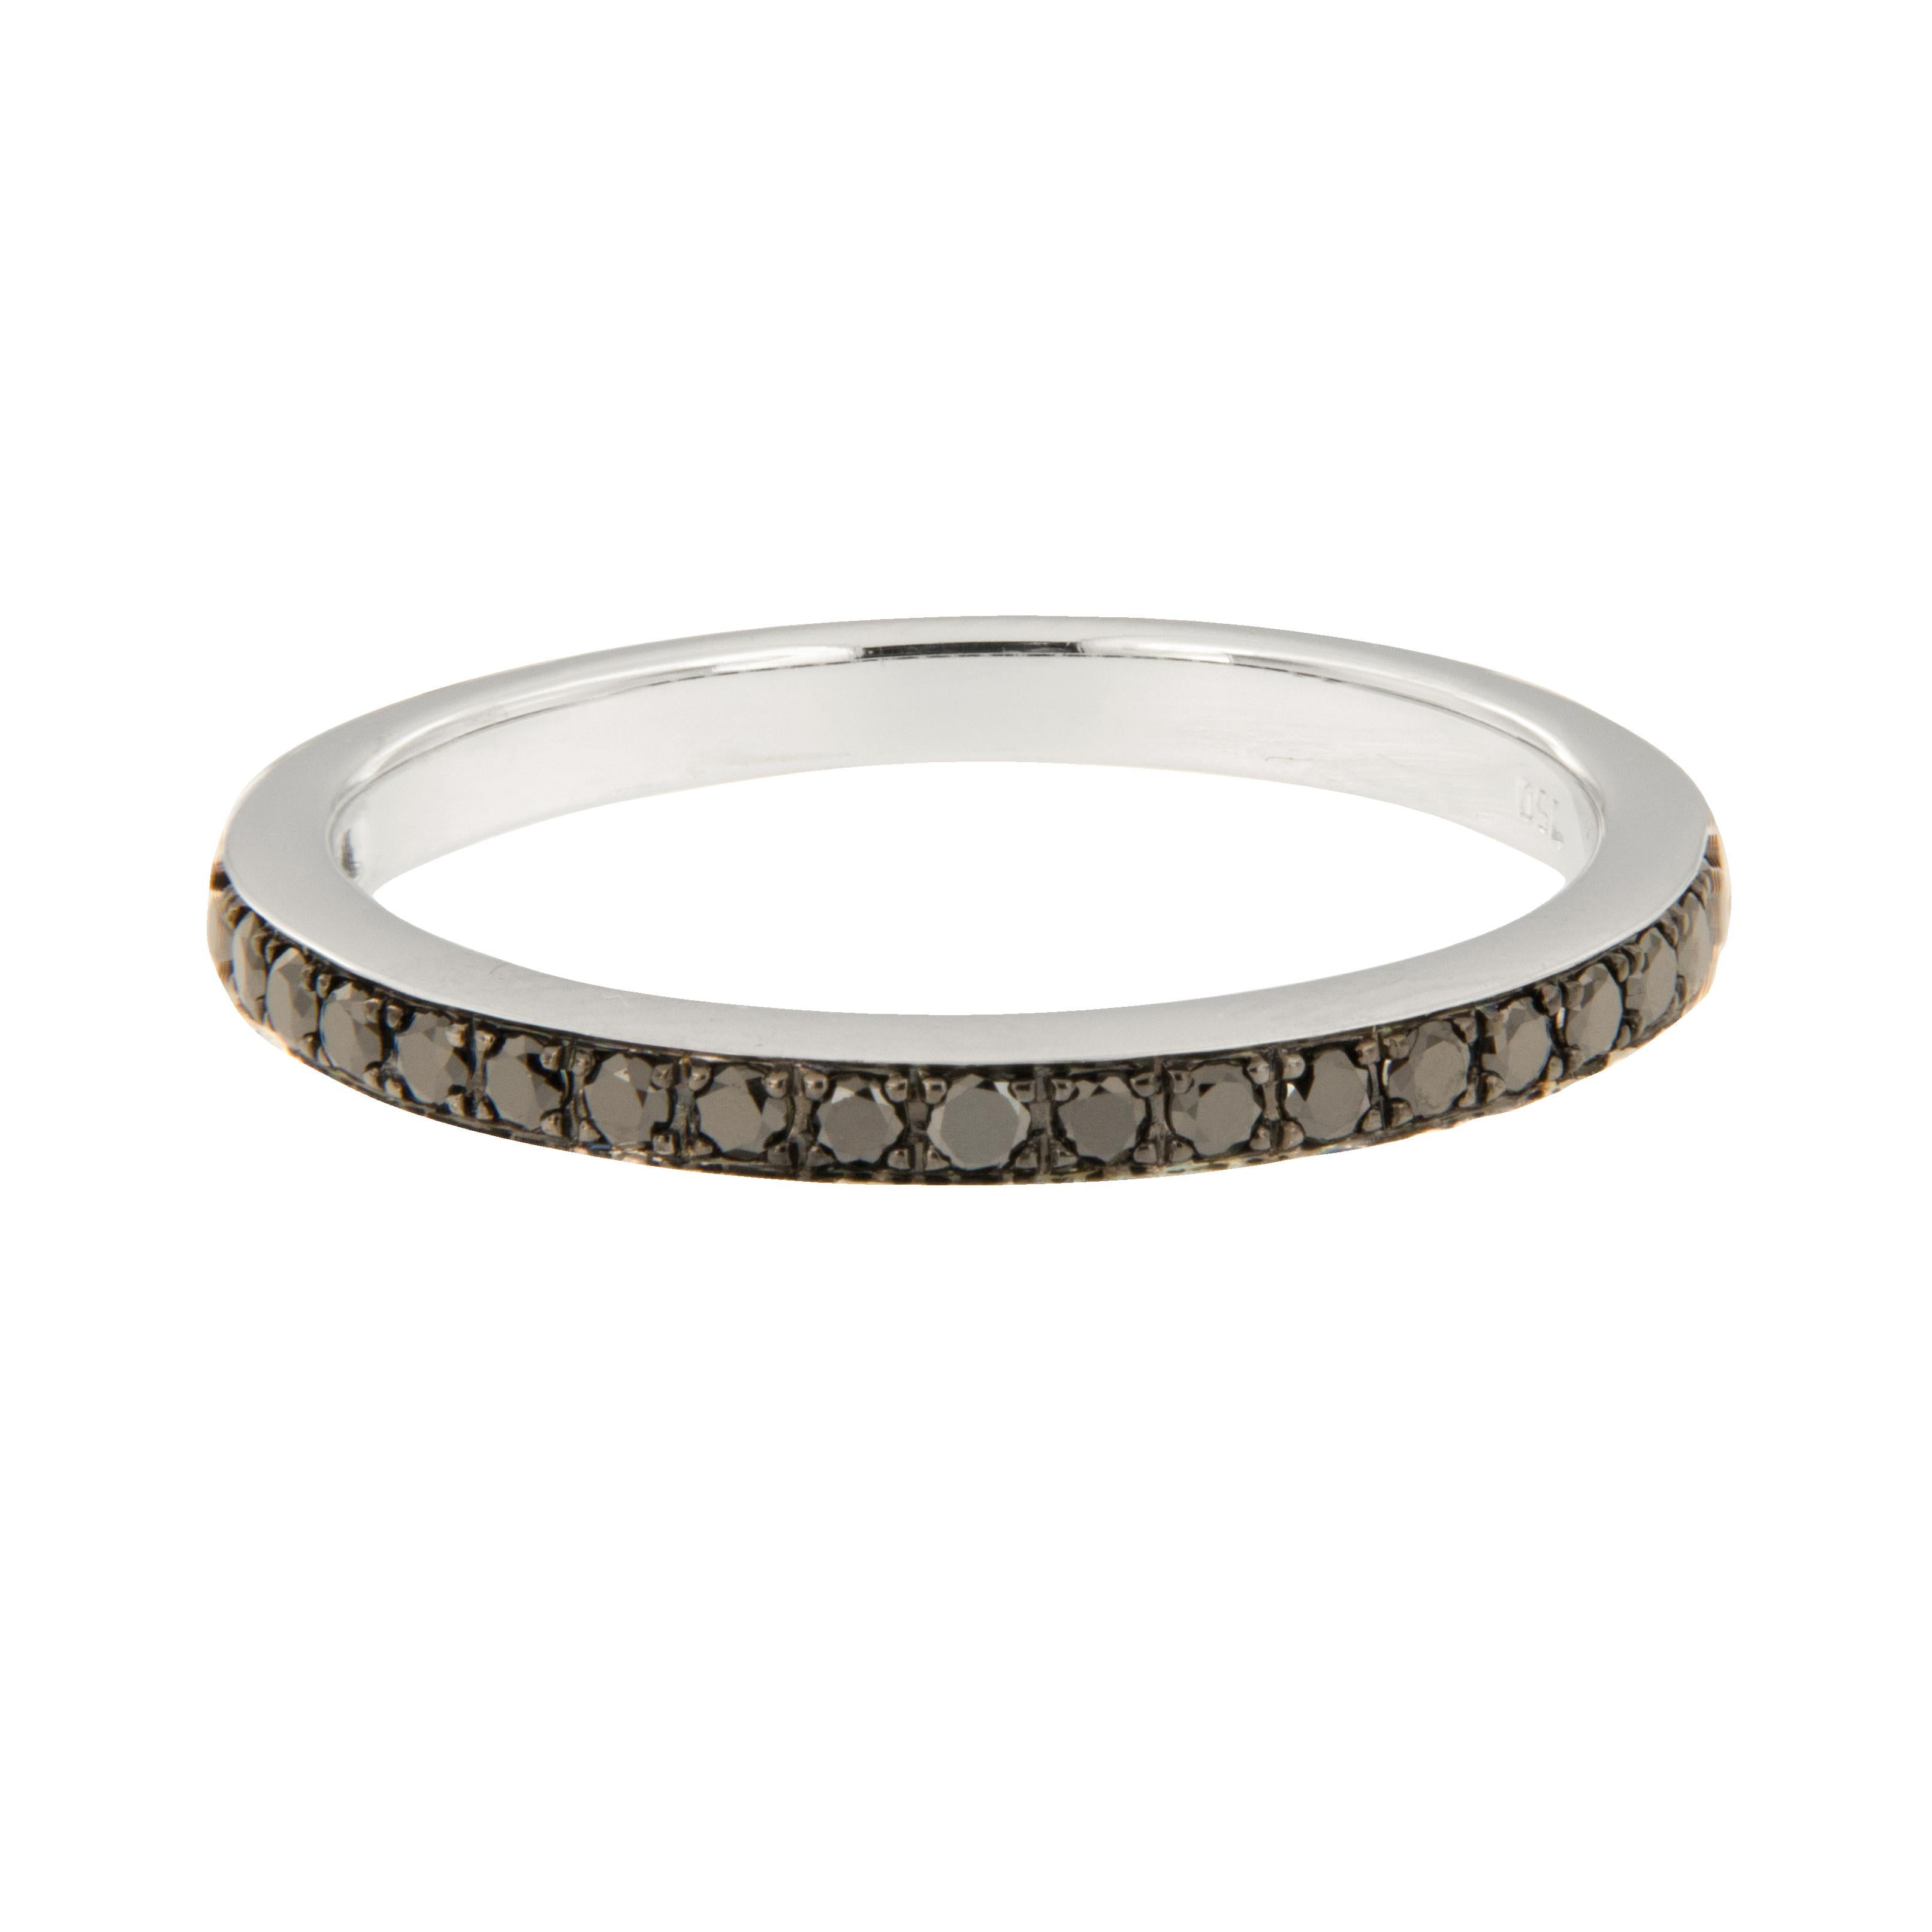 Tuxedo black diamonds accent the top of this band that can be worn alone or also looks fantastic stacked! Black goes with everything which makes this ring versatile. 18 karat white gold with 21 black diamonds = 0.20 Cttw. in a size 5.25.

Diamonds =